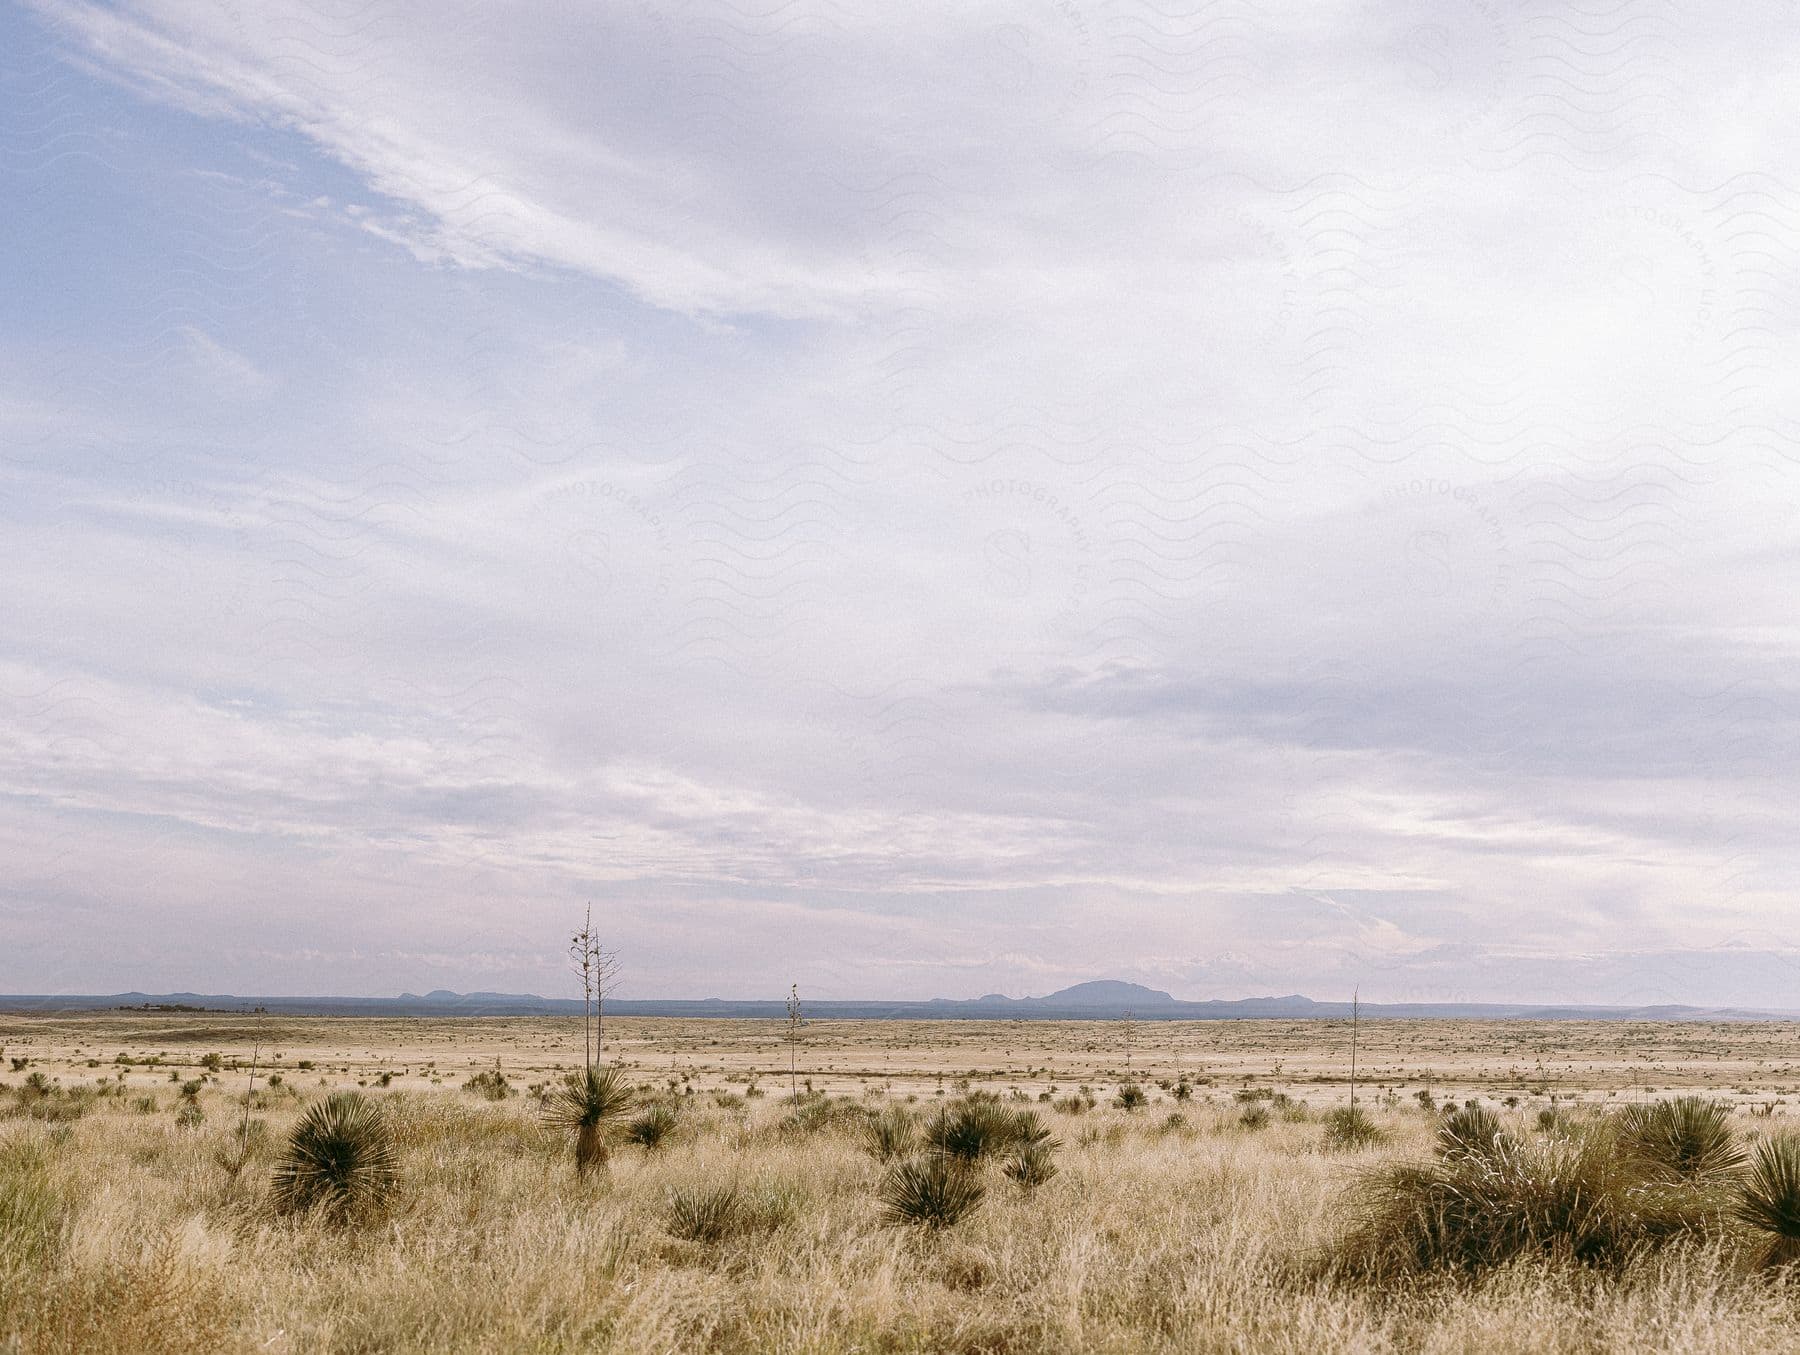 A dry desolate flat desert under a thin cloudfilled sky in west texas